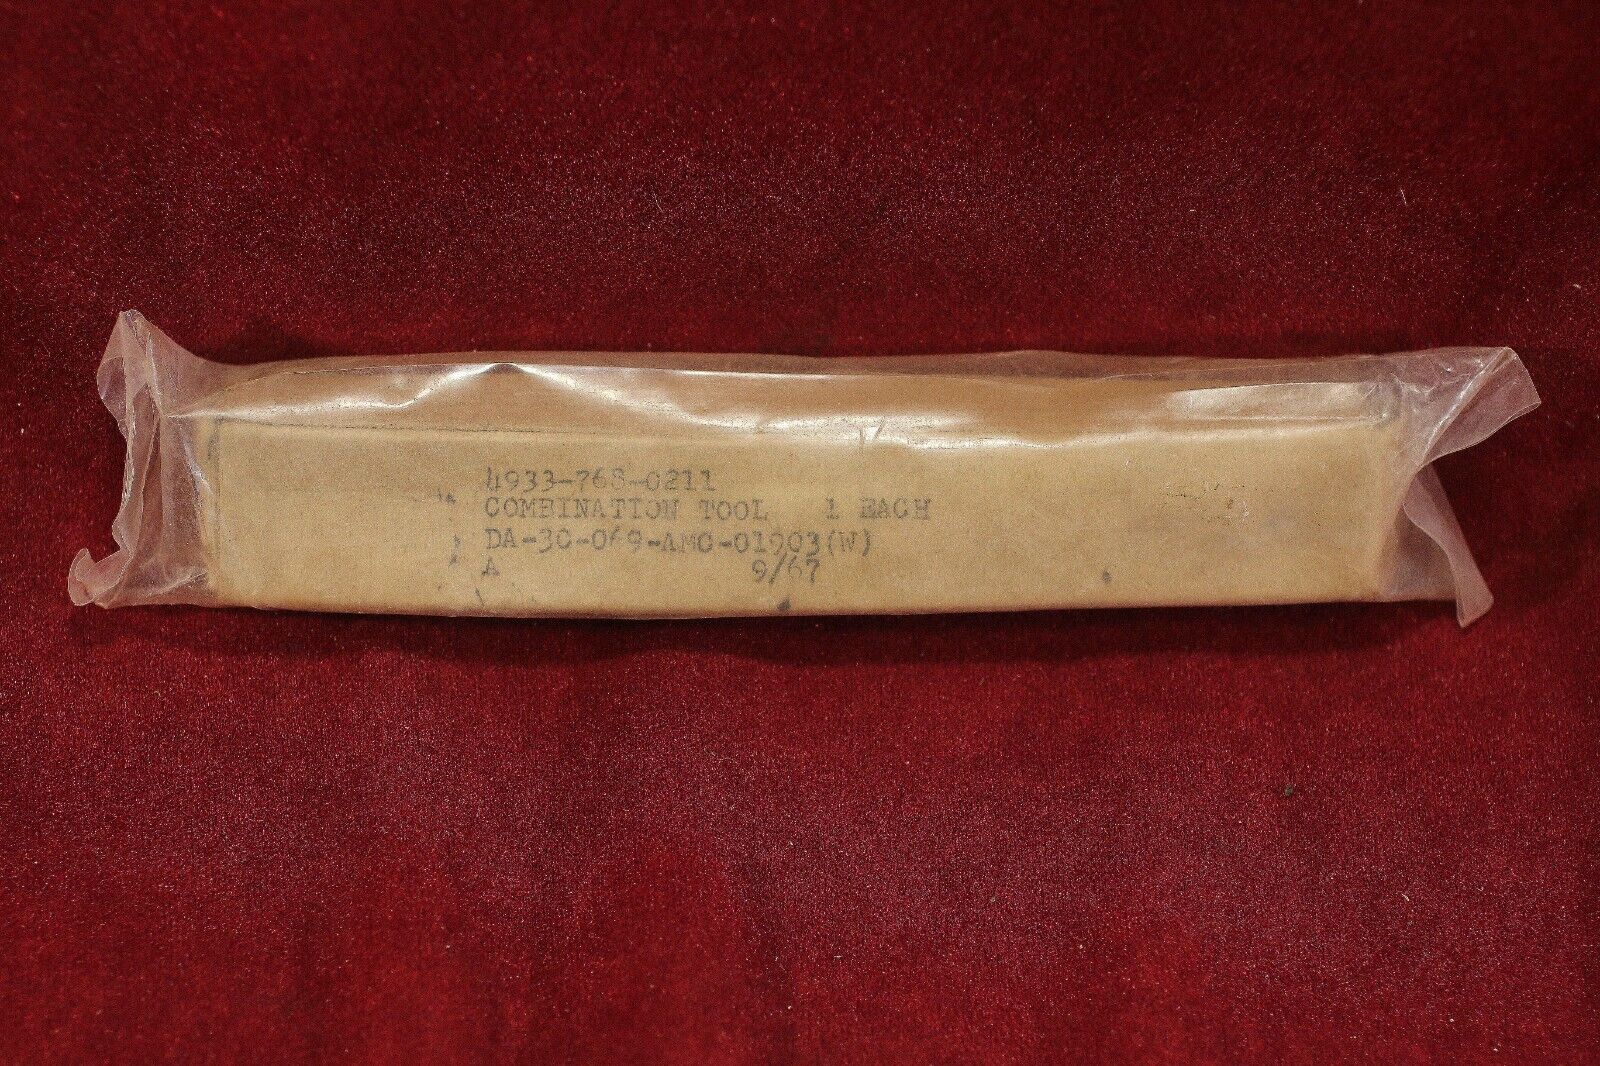 US Army Combination Tool - Viet Nam War - Sealed NOS 1967